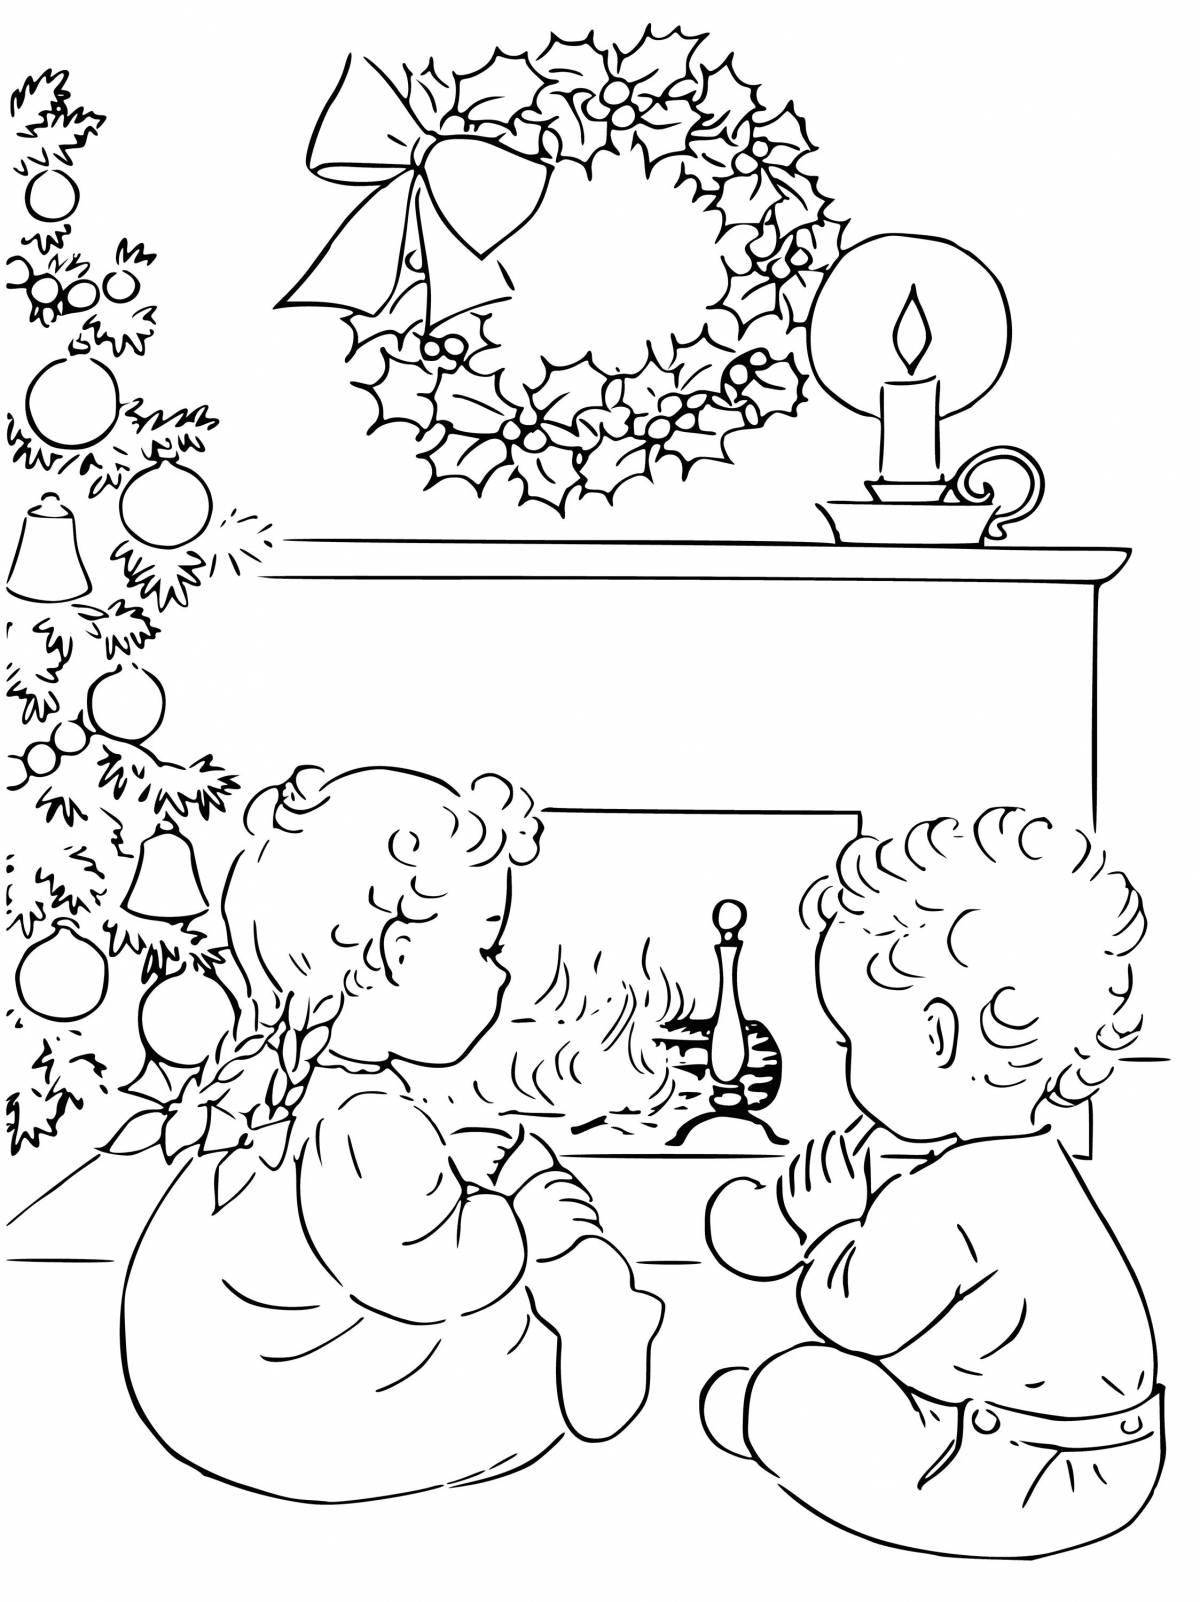 Merry Christmas coloring book for 5-6 year olds